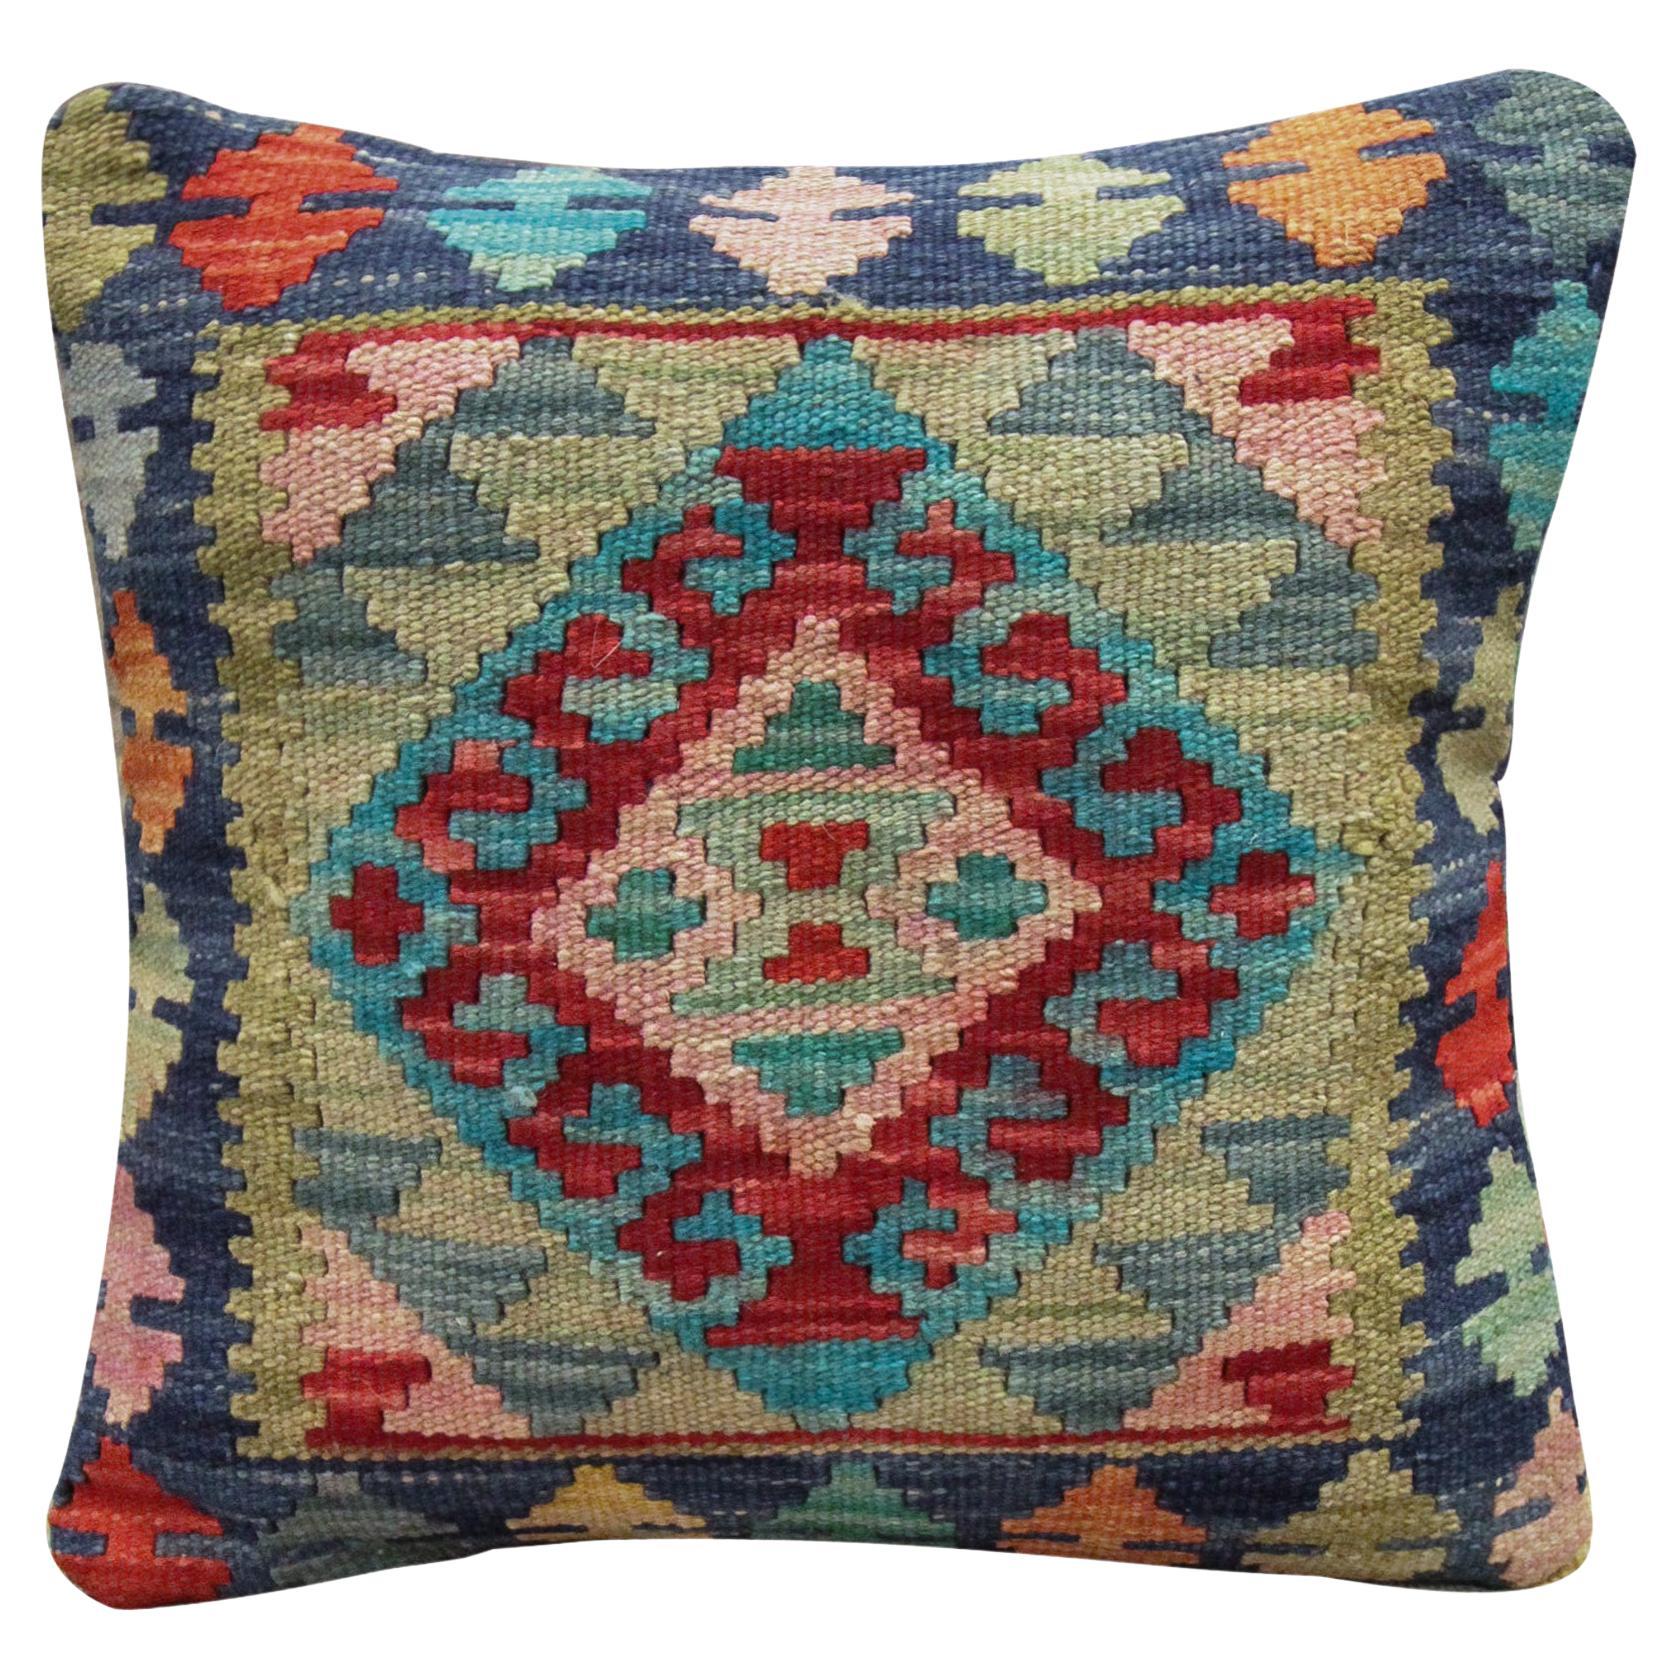 Kilim Cushion Cover New Blue Green Handwoven Wool Scatter Cushion